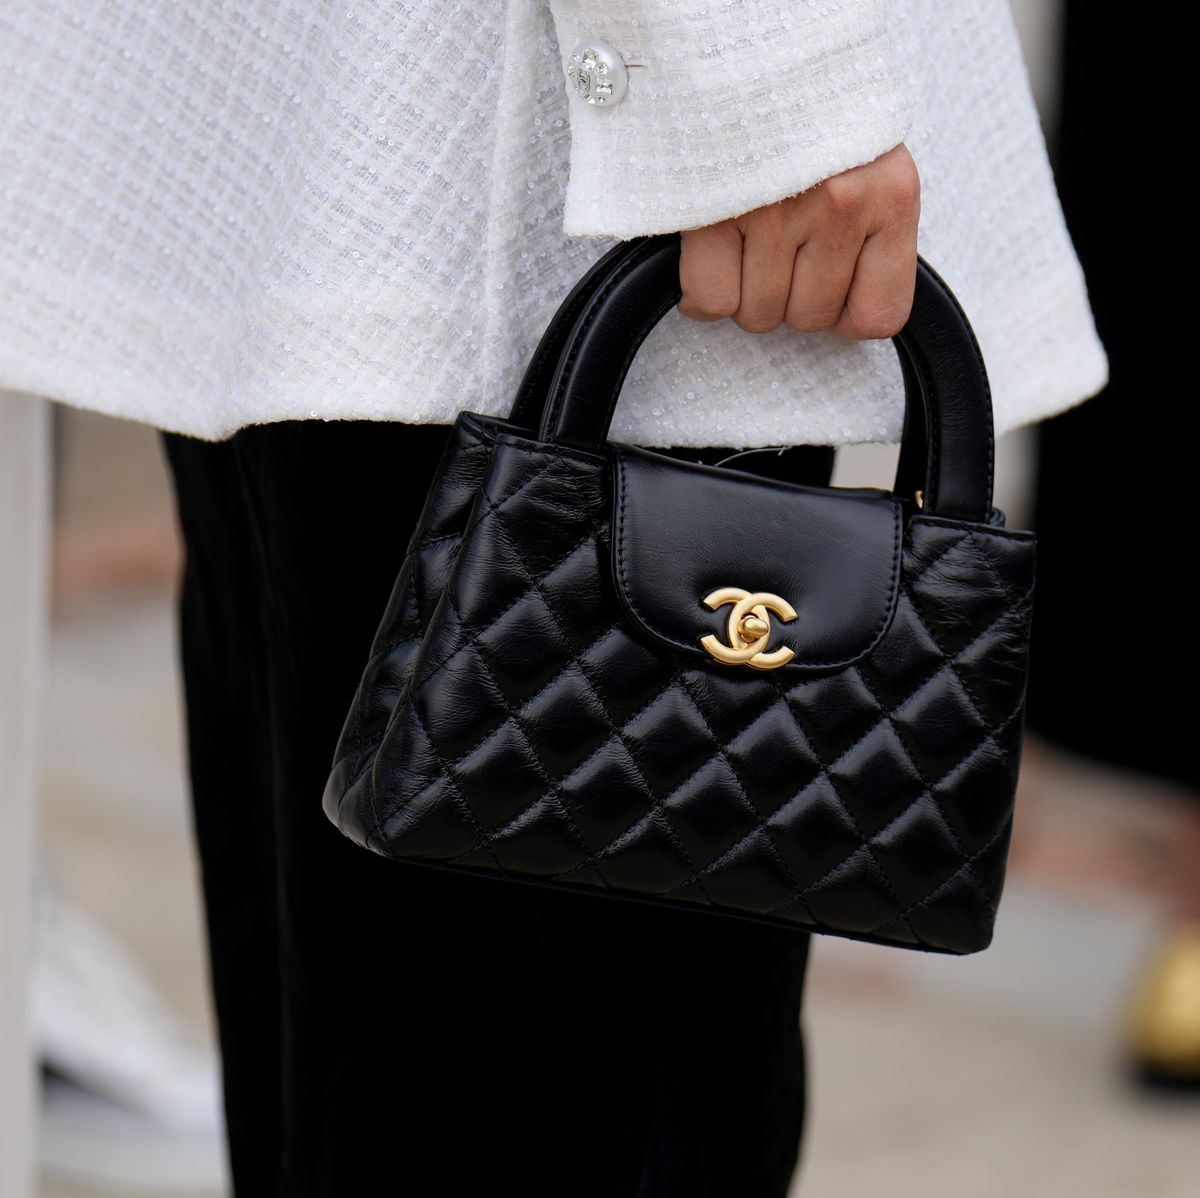 Get the Most Cash for your Chanel Bag in 3 Simple Ways